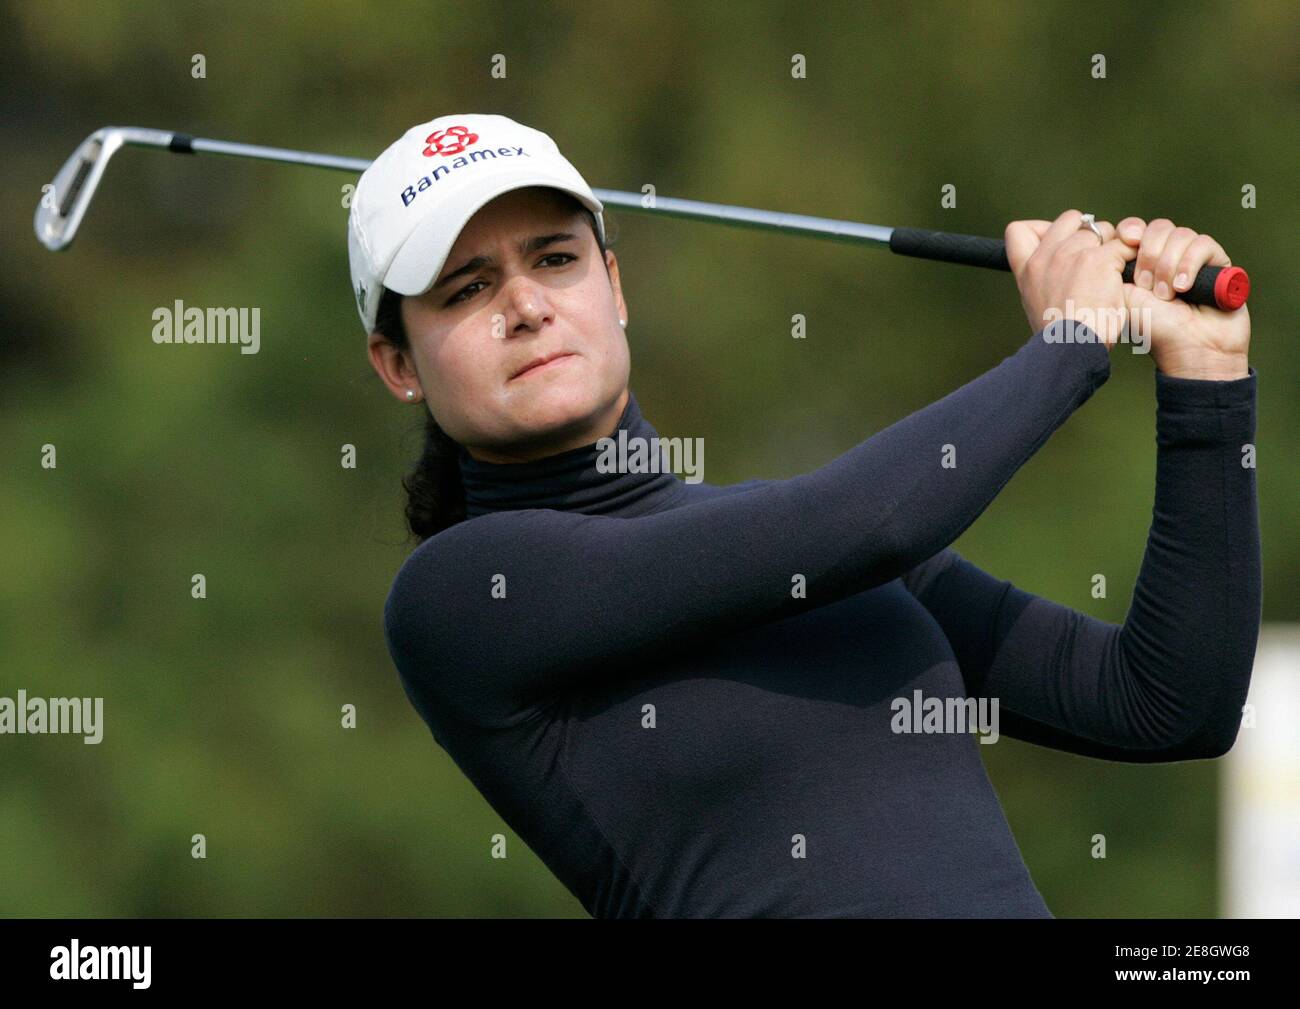 Lorena Ochoa of Mexico tees off at the 3rd hole during the first round of the LPGA HanaBank-Kolon Championship golf tournament at Sky72 Golf Club Ocean course in Incheon, west of Seoul, October 30, 2009.  REUTERS/Jo Yong-Hak (SOUTH KOREA SPORT GOLF) Stock Photo